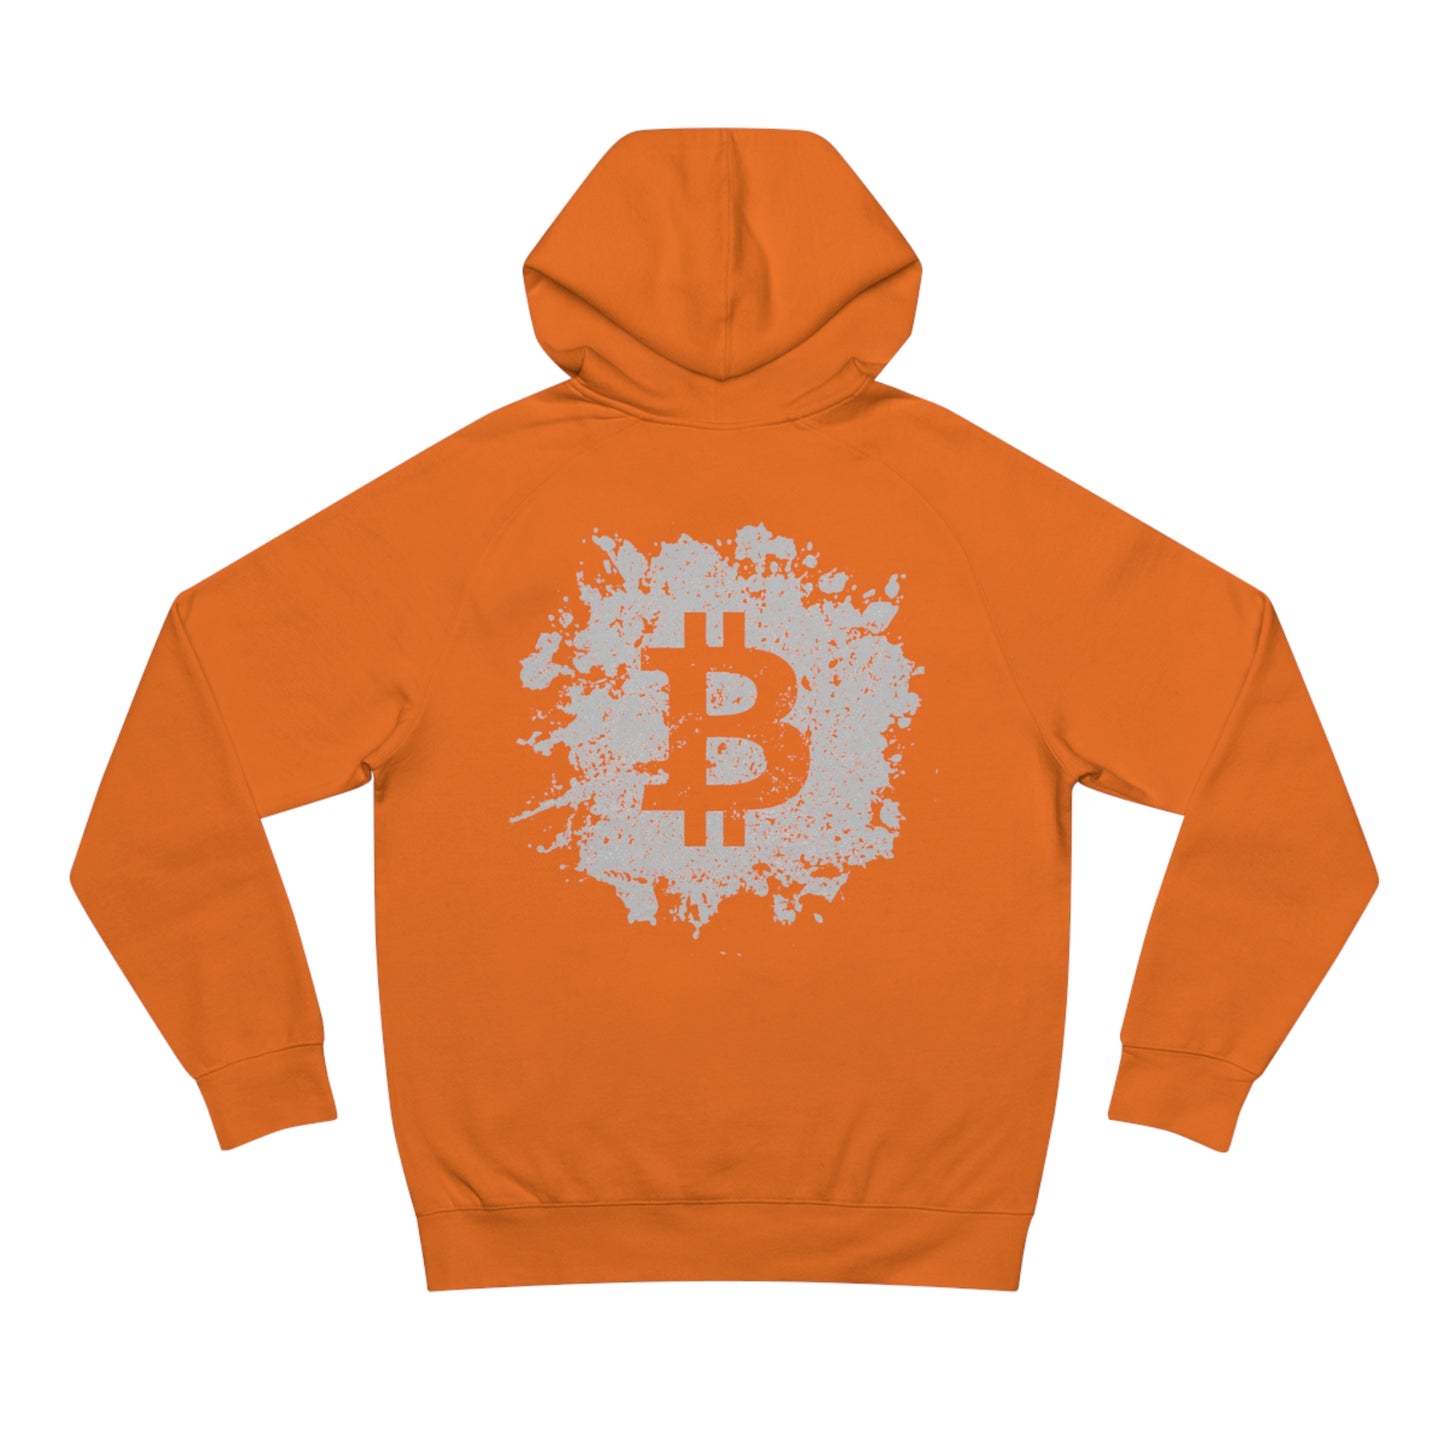 Bitcoin Enthusiast Hoodie - Warm Mid-Weight Cotton Blend - Unisex Crypto Gear